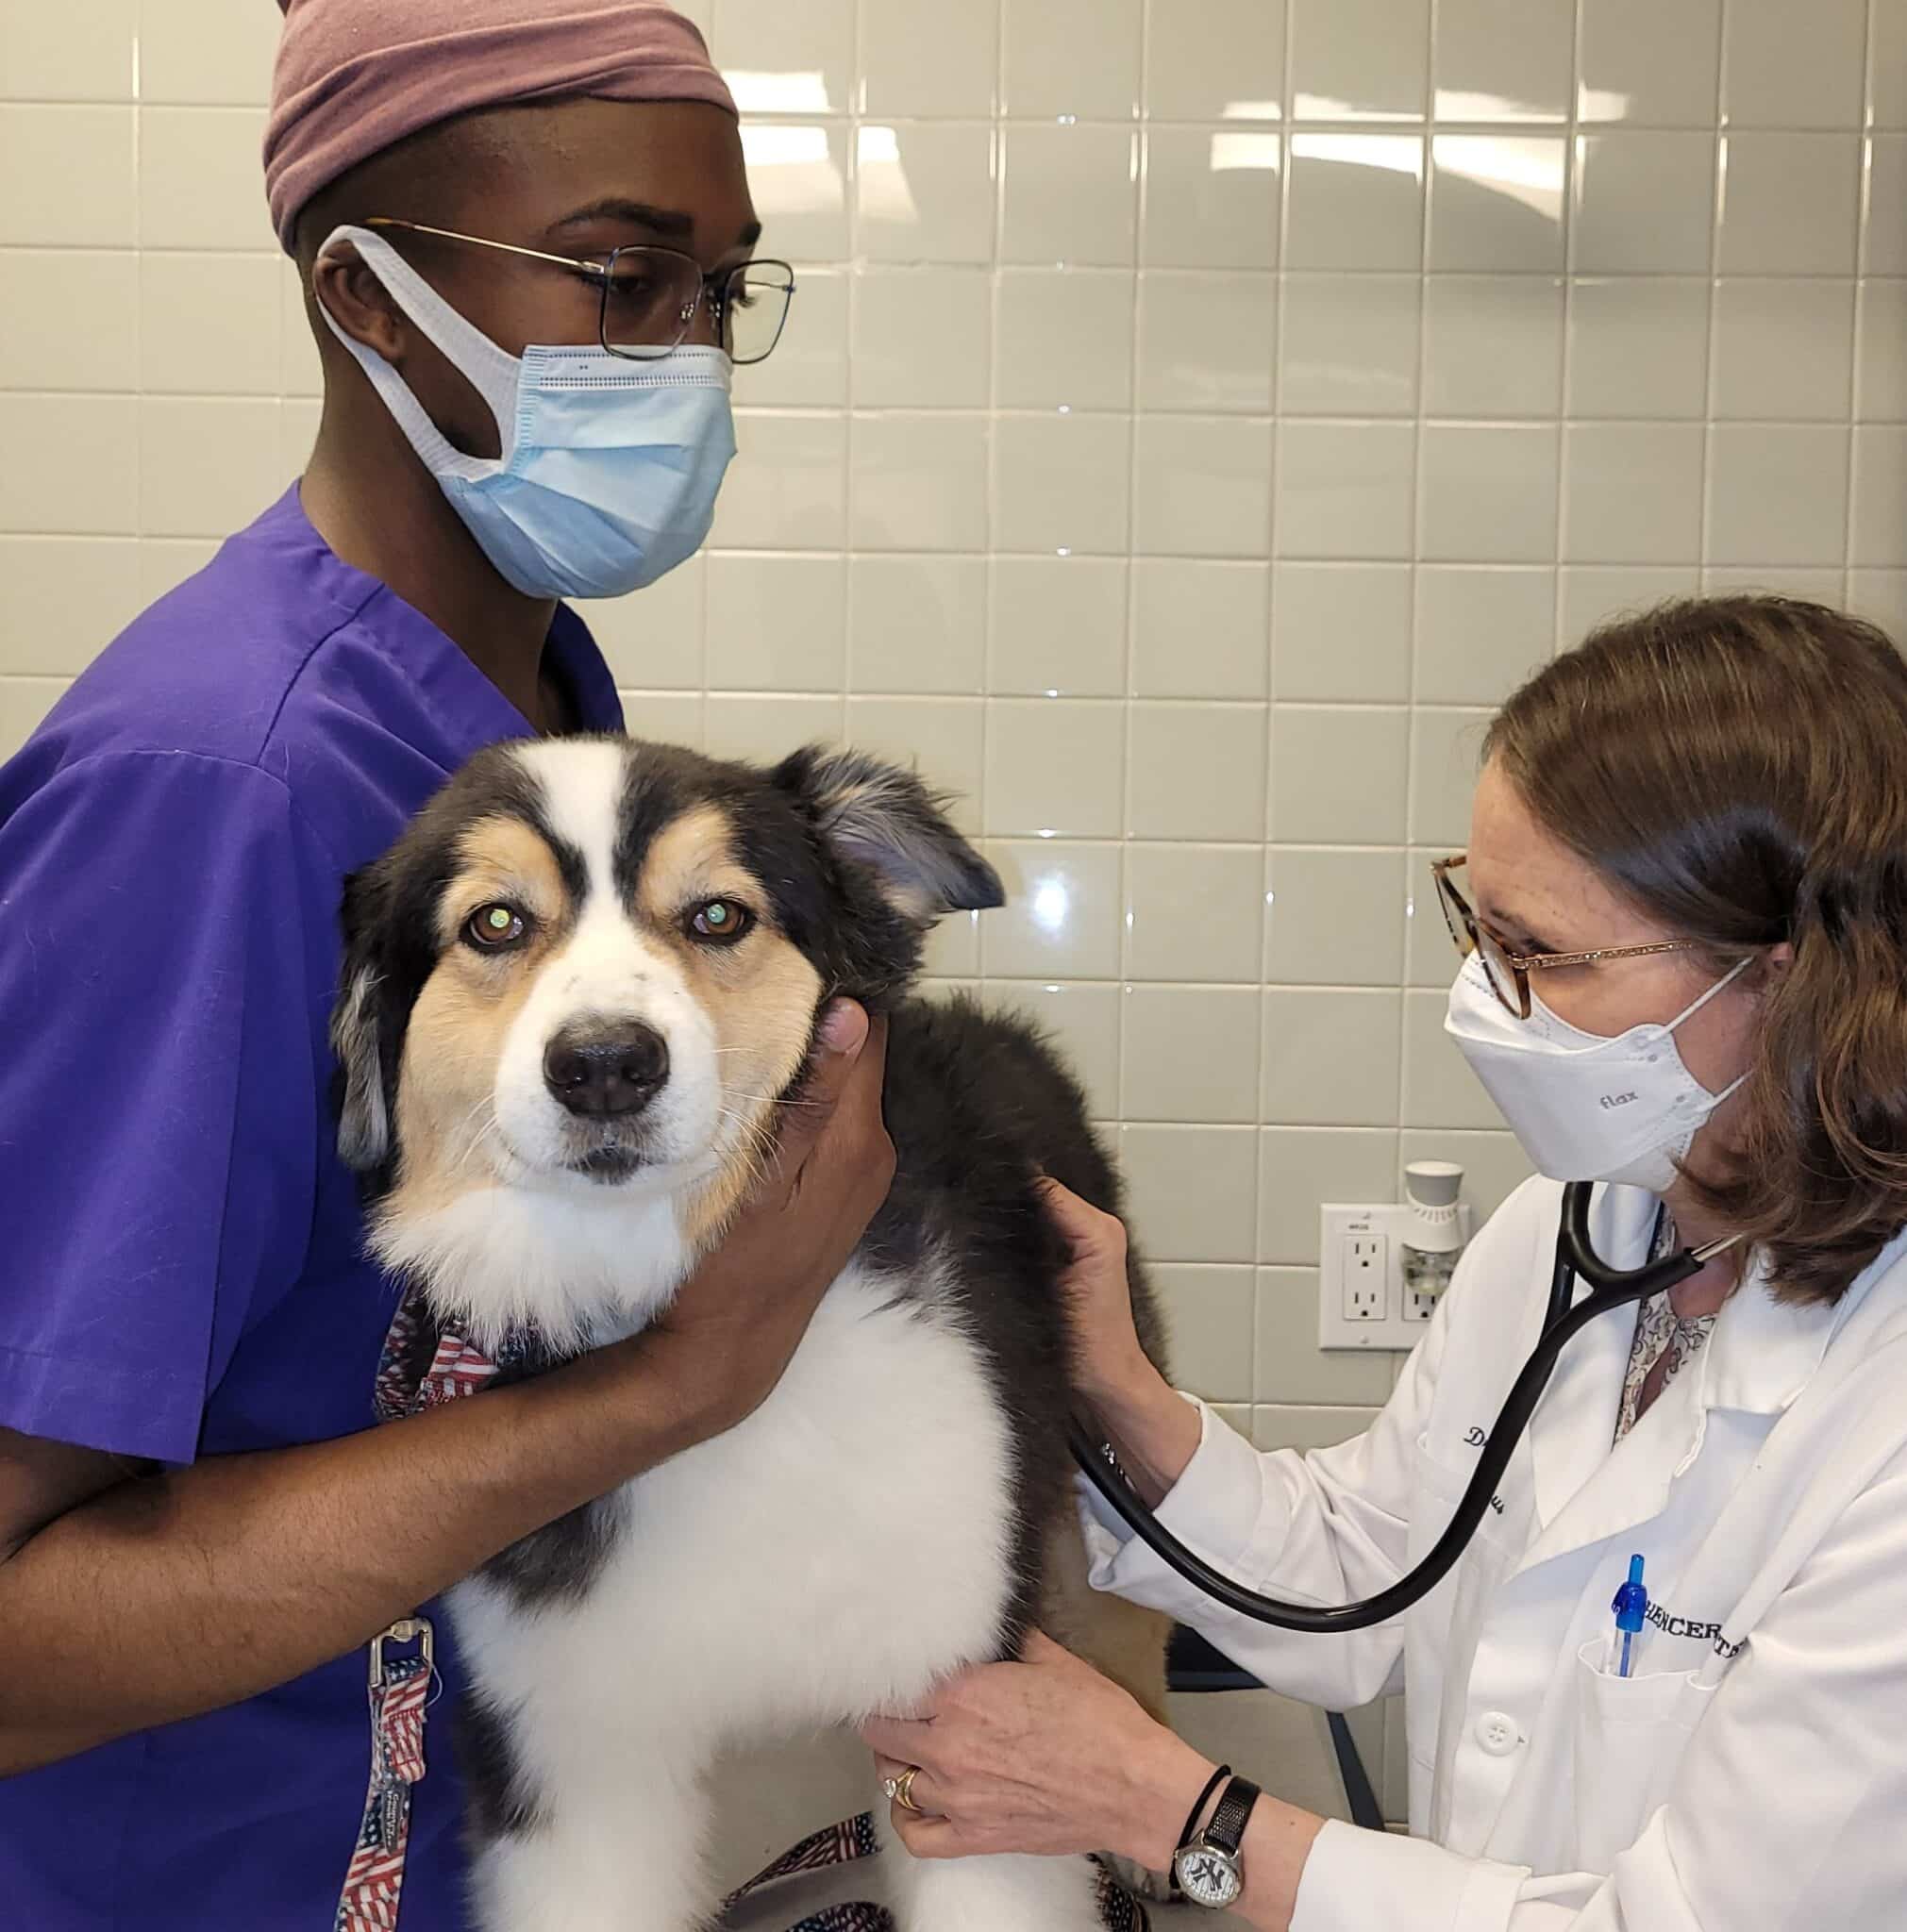 A veterinarian and a veterinary assistant examine a dog